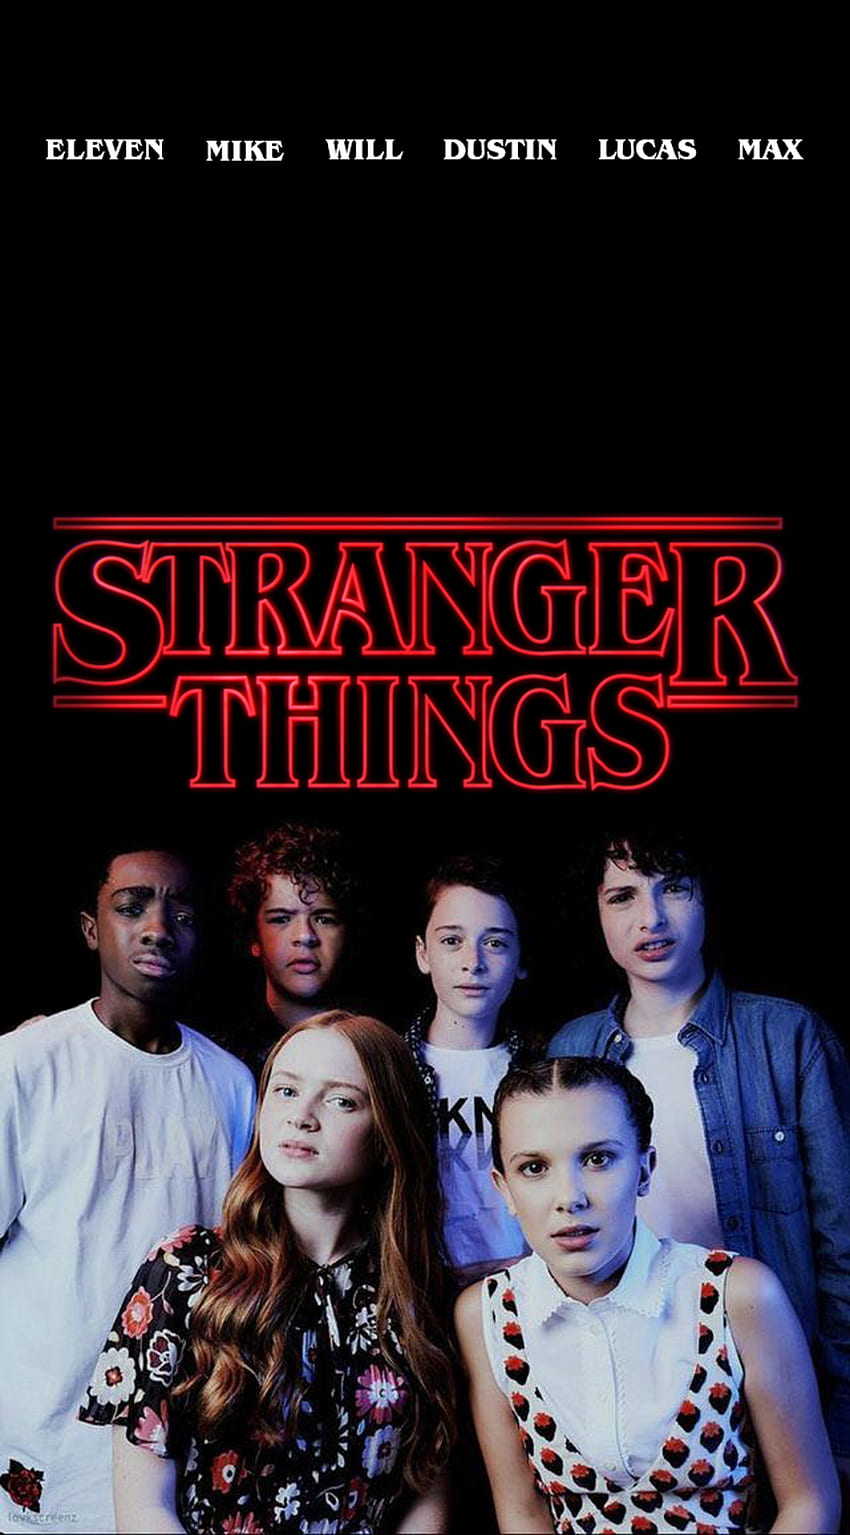 Stranger Things Eleven And Mike, 11 Stranger Things HD phone wallpaper